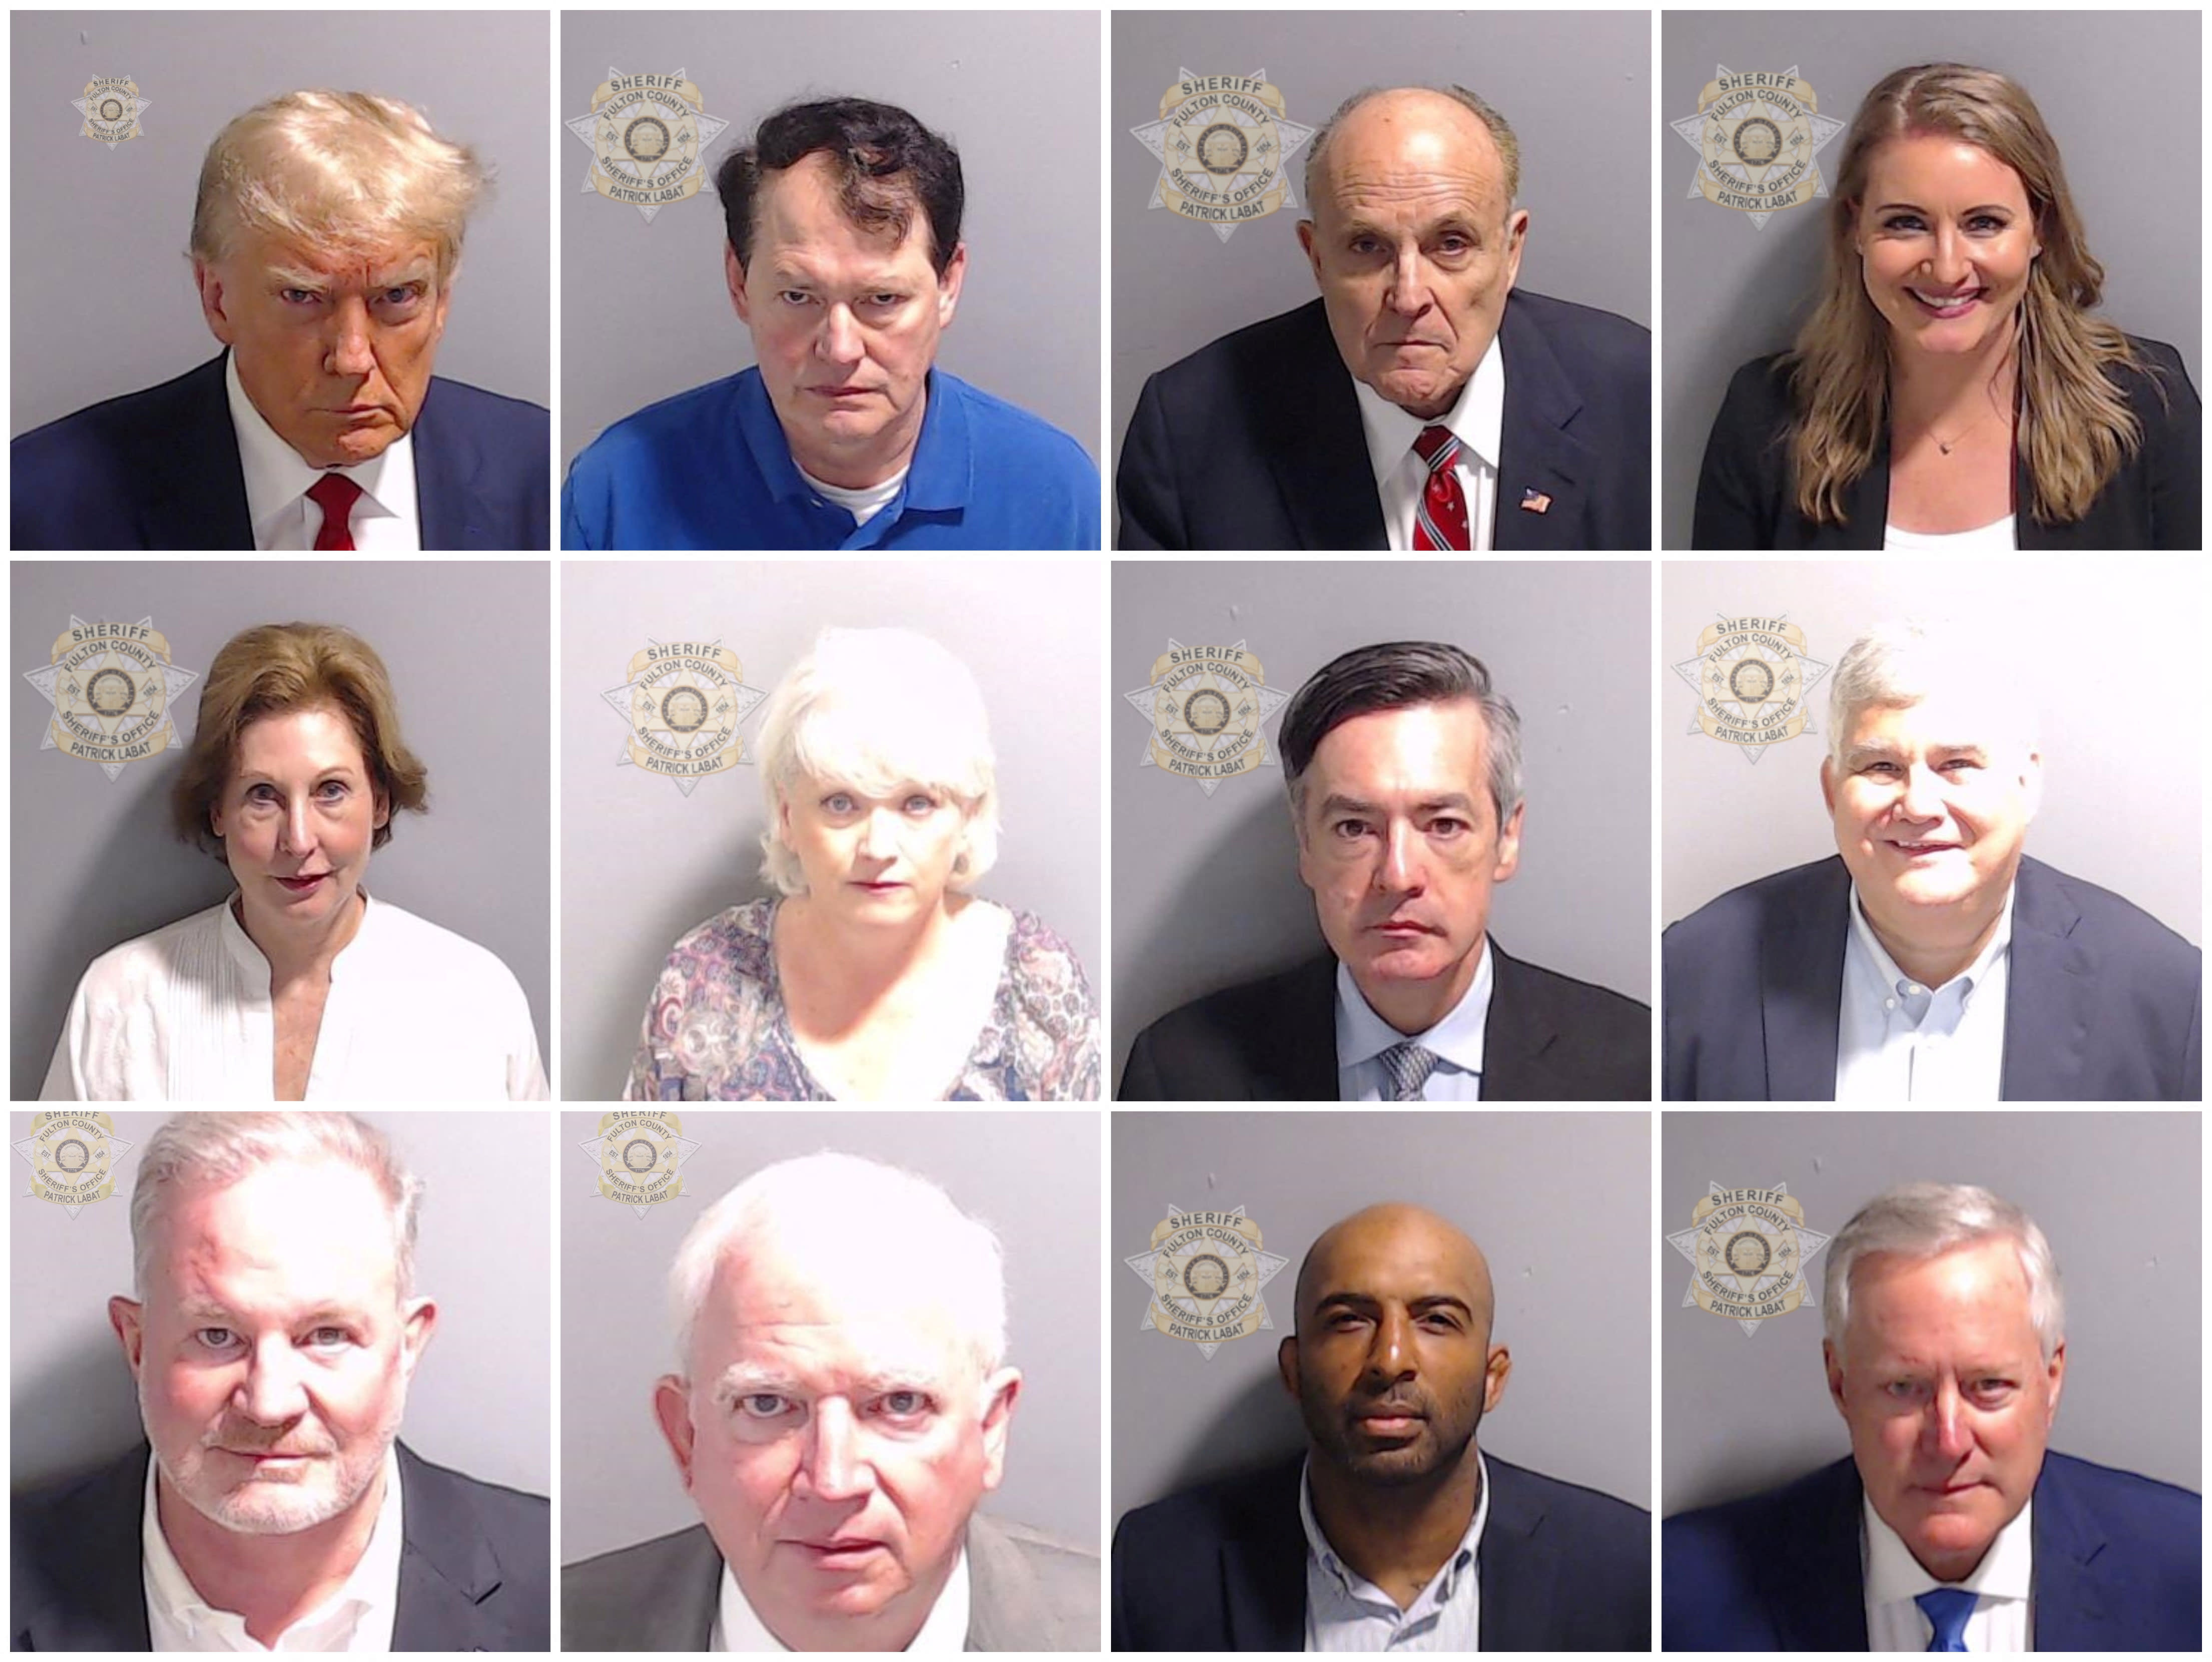 A combination picture shows police booking mugshots of former U.S. President Donald Trump and 11 of the 18 people indicted with him, including Ray Smith, a lawyer who previously represented Trump in Georgia, Rudy Giuliani, who served as Trump's personal lawyer, Jenna Ellis, Sidney Powell, former Georgia Republican Party leader Cathy Latham, Trump campaign attorney Kenneth Chesebro, former Georgia Republican Party leader David Shafer, Republican poll watcher Scott Hall, Trump's former lawyer John Eastman, Harrison Floyd and former White House Chief of Staff Mark Meadows.